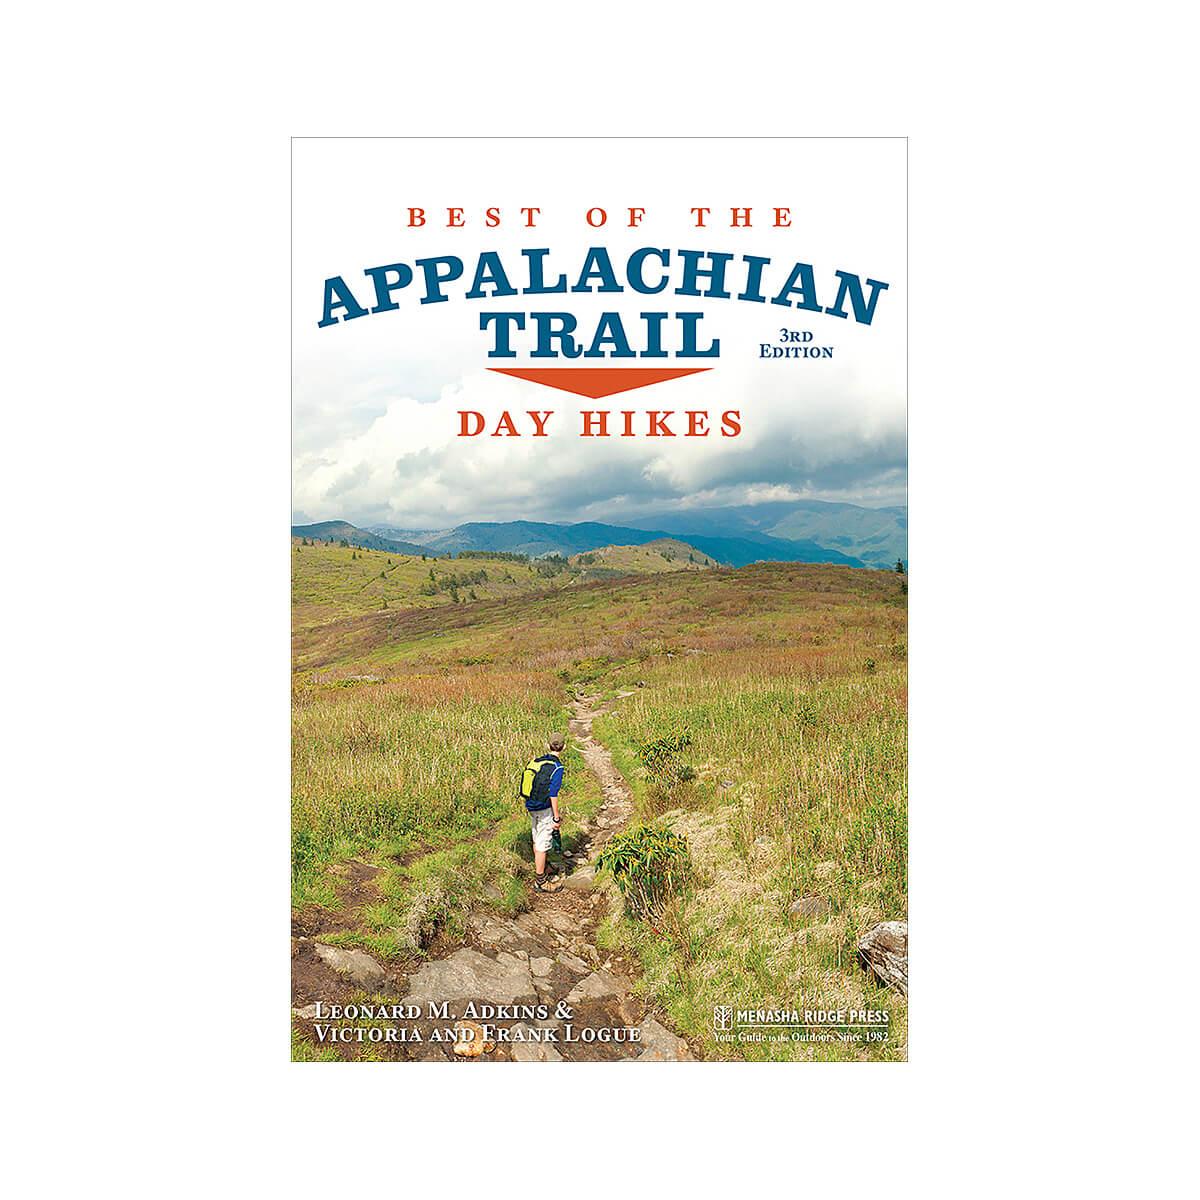  Best Of The Appalachian Trail Day Hikes - Third Edition